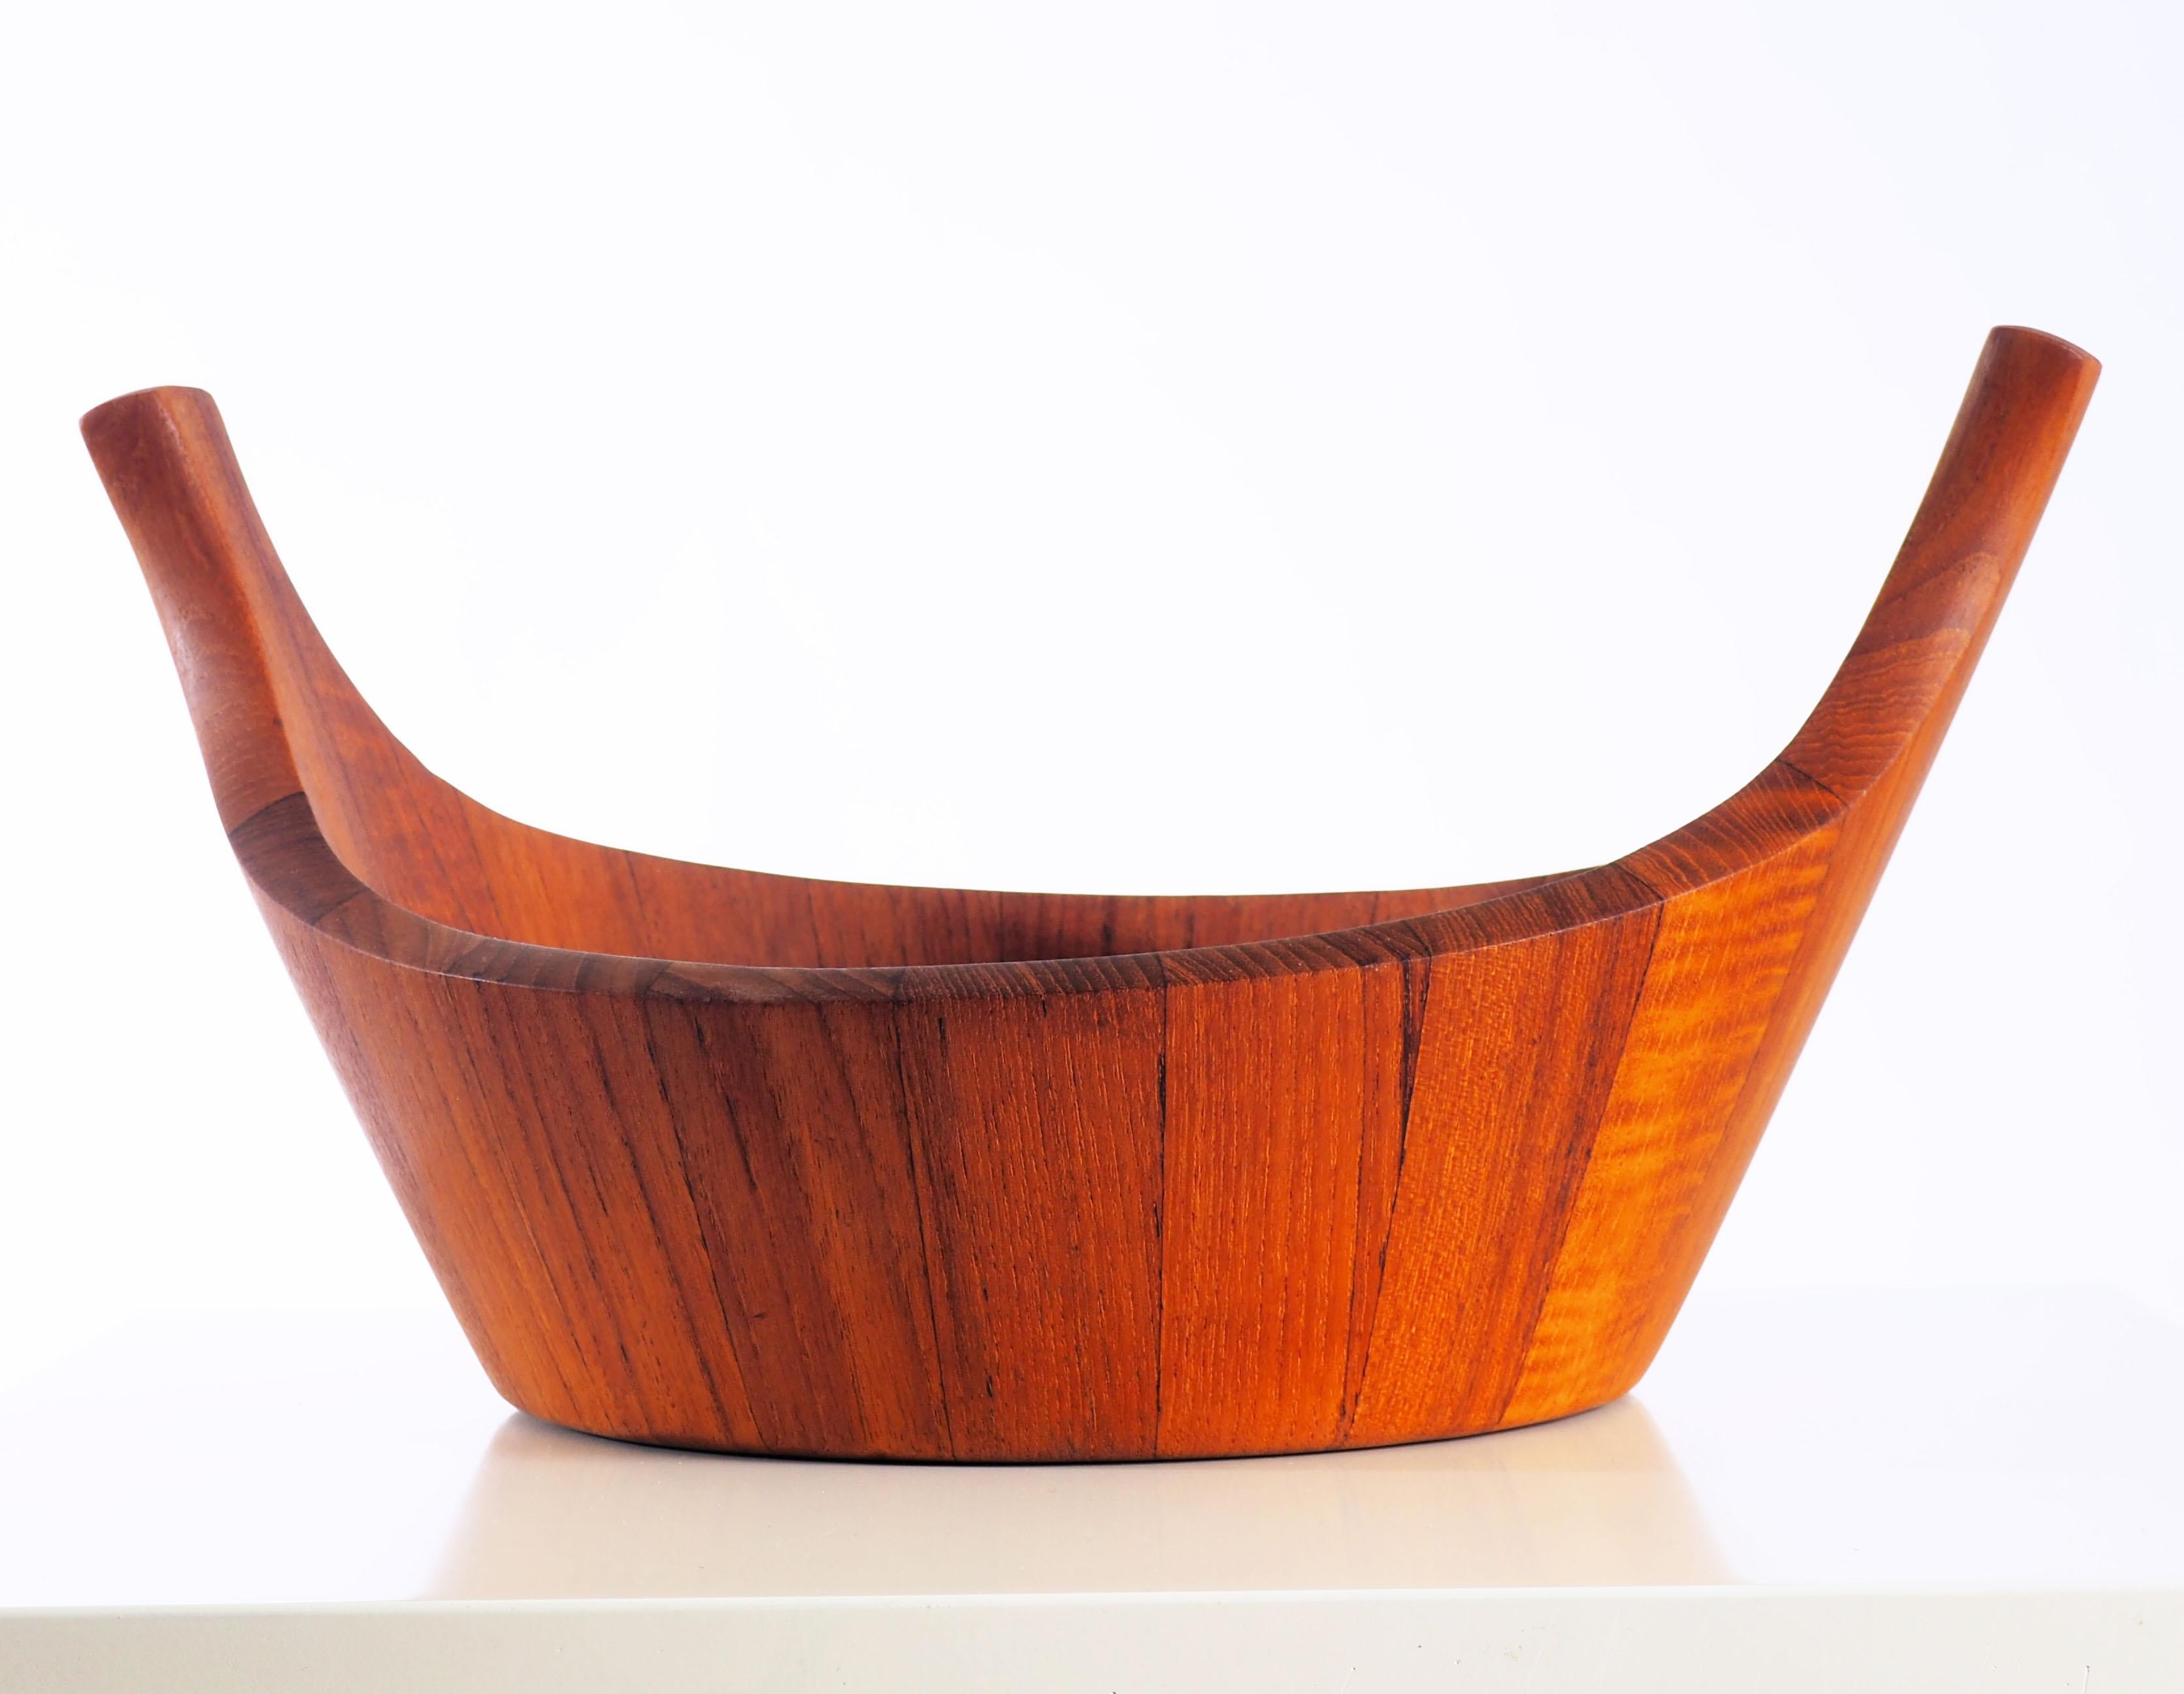 Staved bowl in massive teak by Jens Harald Quistgaard. Quistgaard designed the bowl for his own company Dansk Designs and was inspired by traditional Scandinavian rural wooden crafts. 